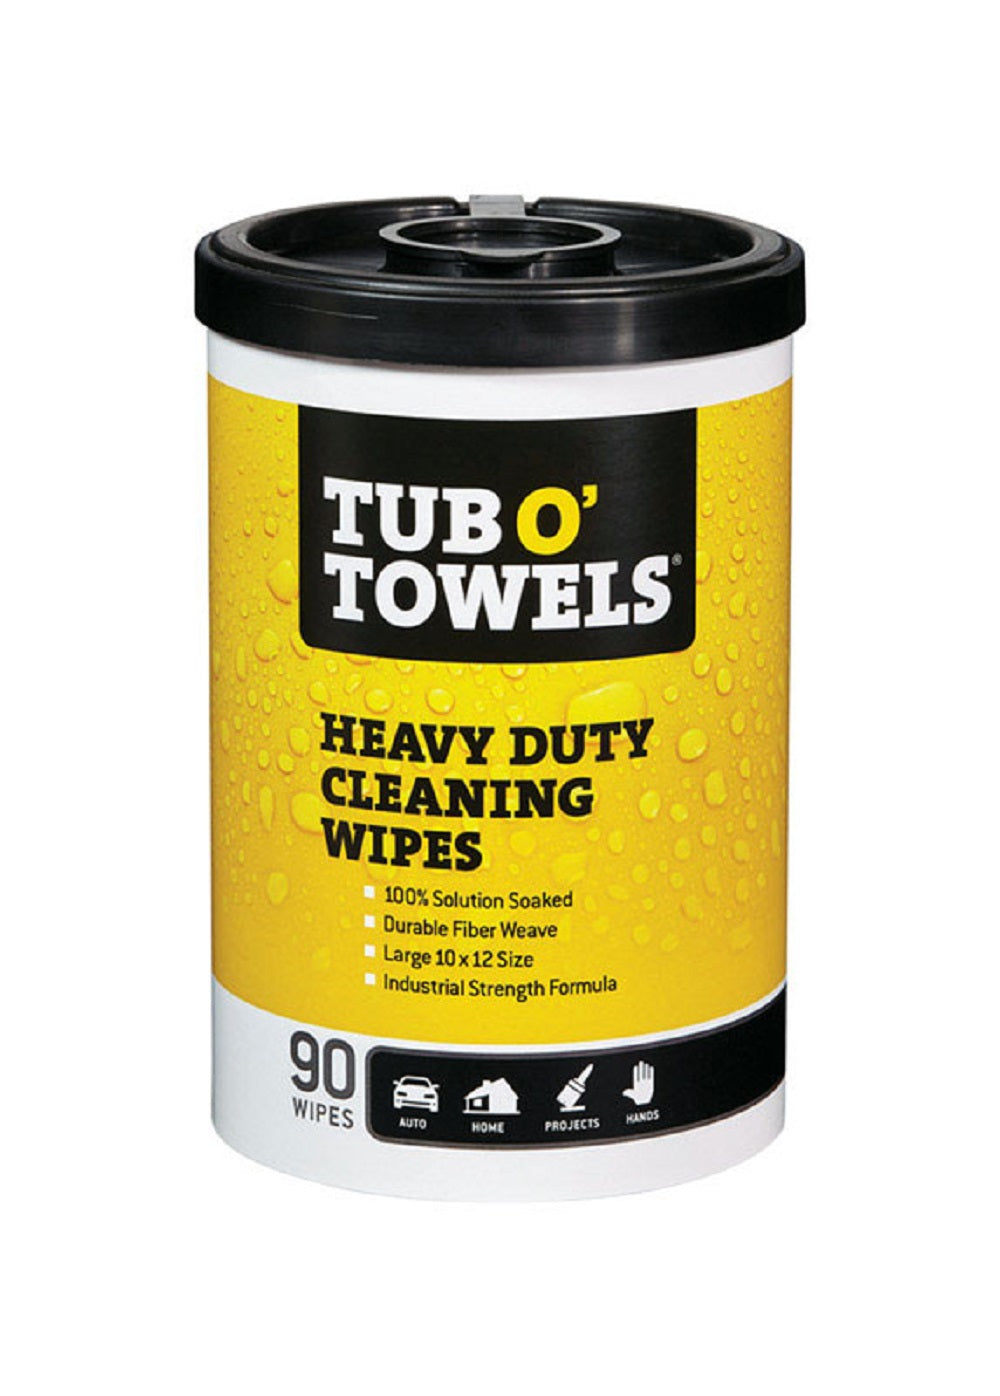 Tub O' Towels Heavy Duty Cleaning Wipes,  90-Count, Fiber Weave